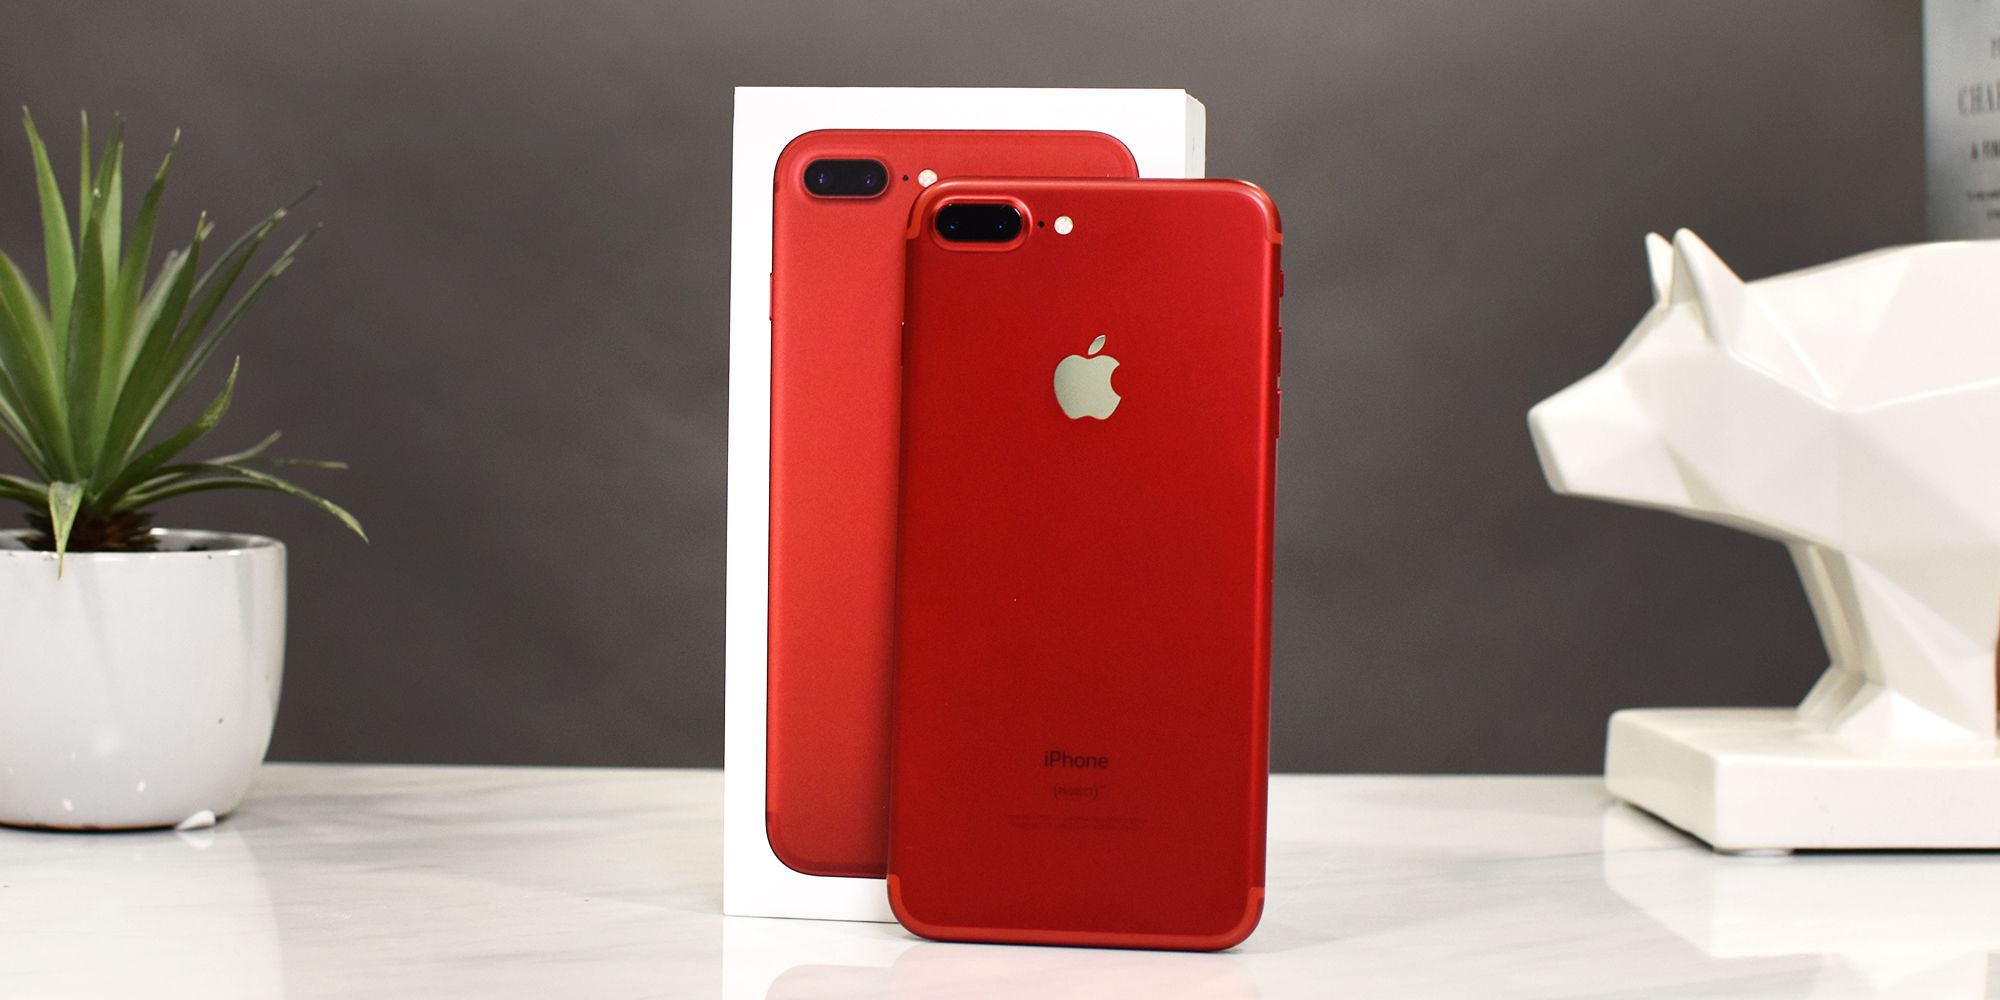 Product Red Iphone 7 Price And Reviews For 18 New Apple Iphone 7 Plus In Red